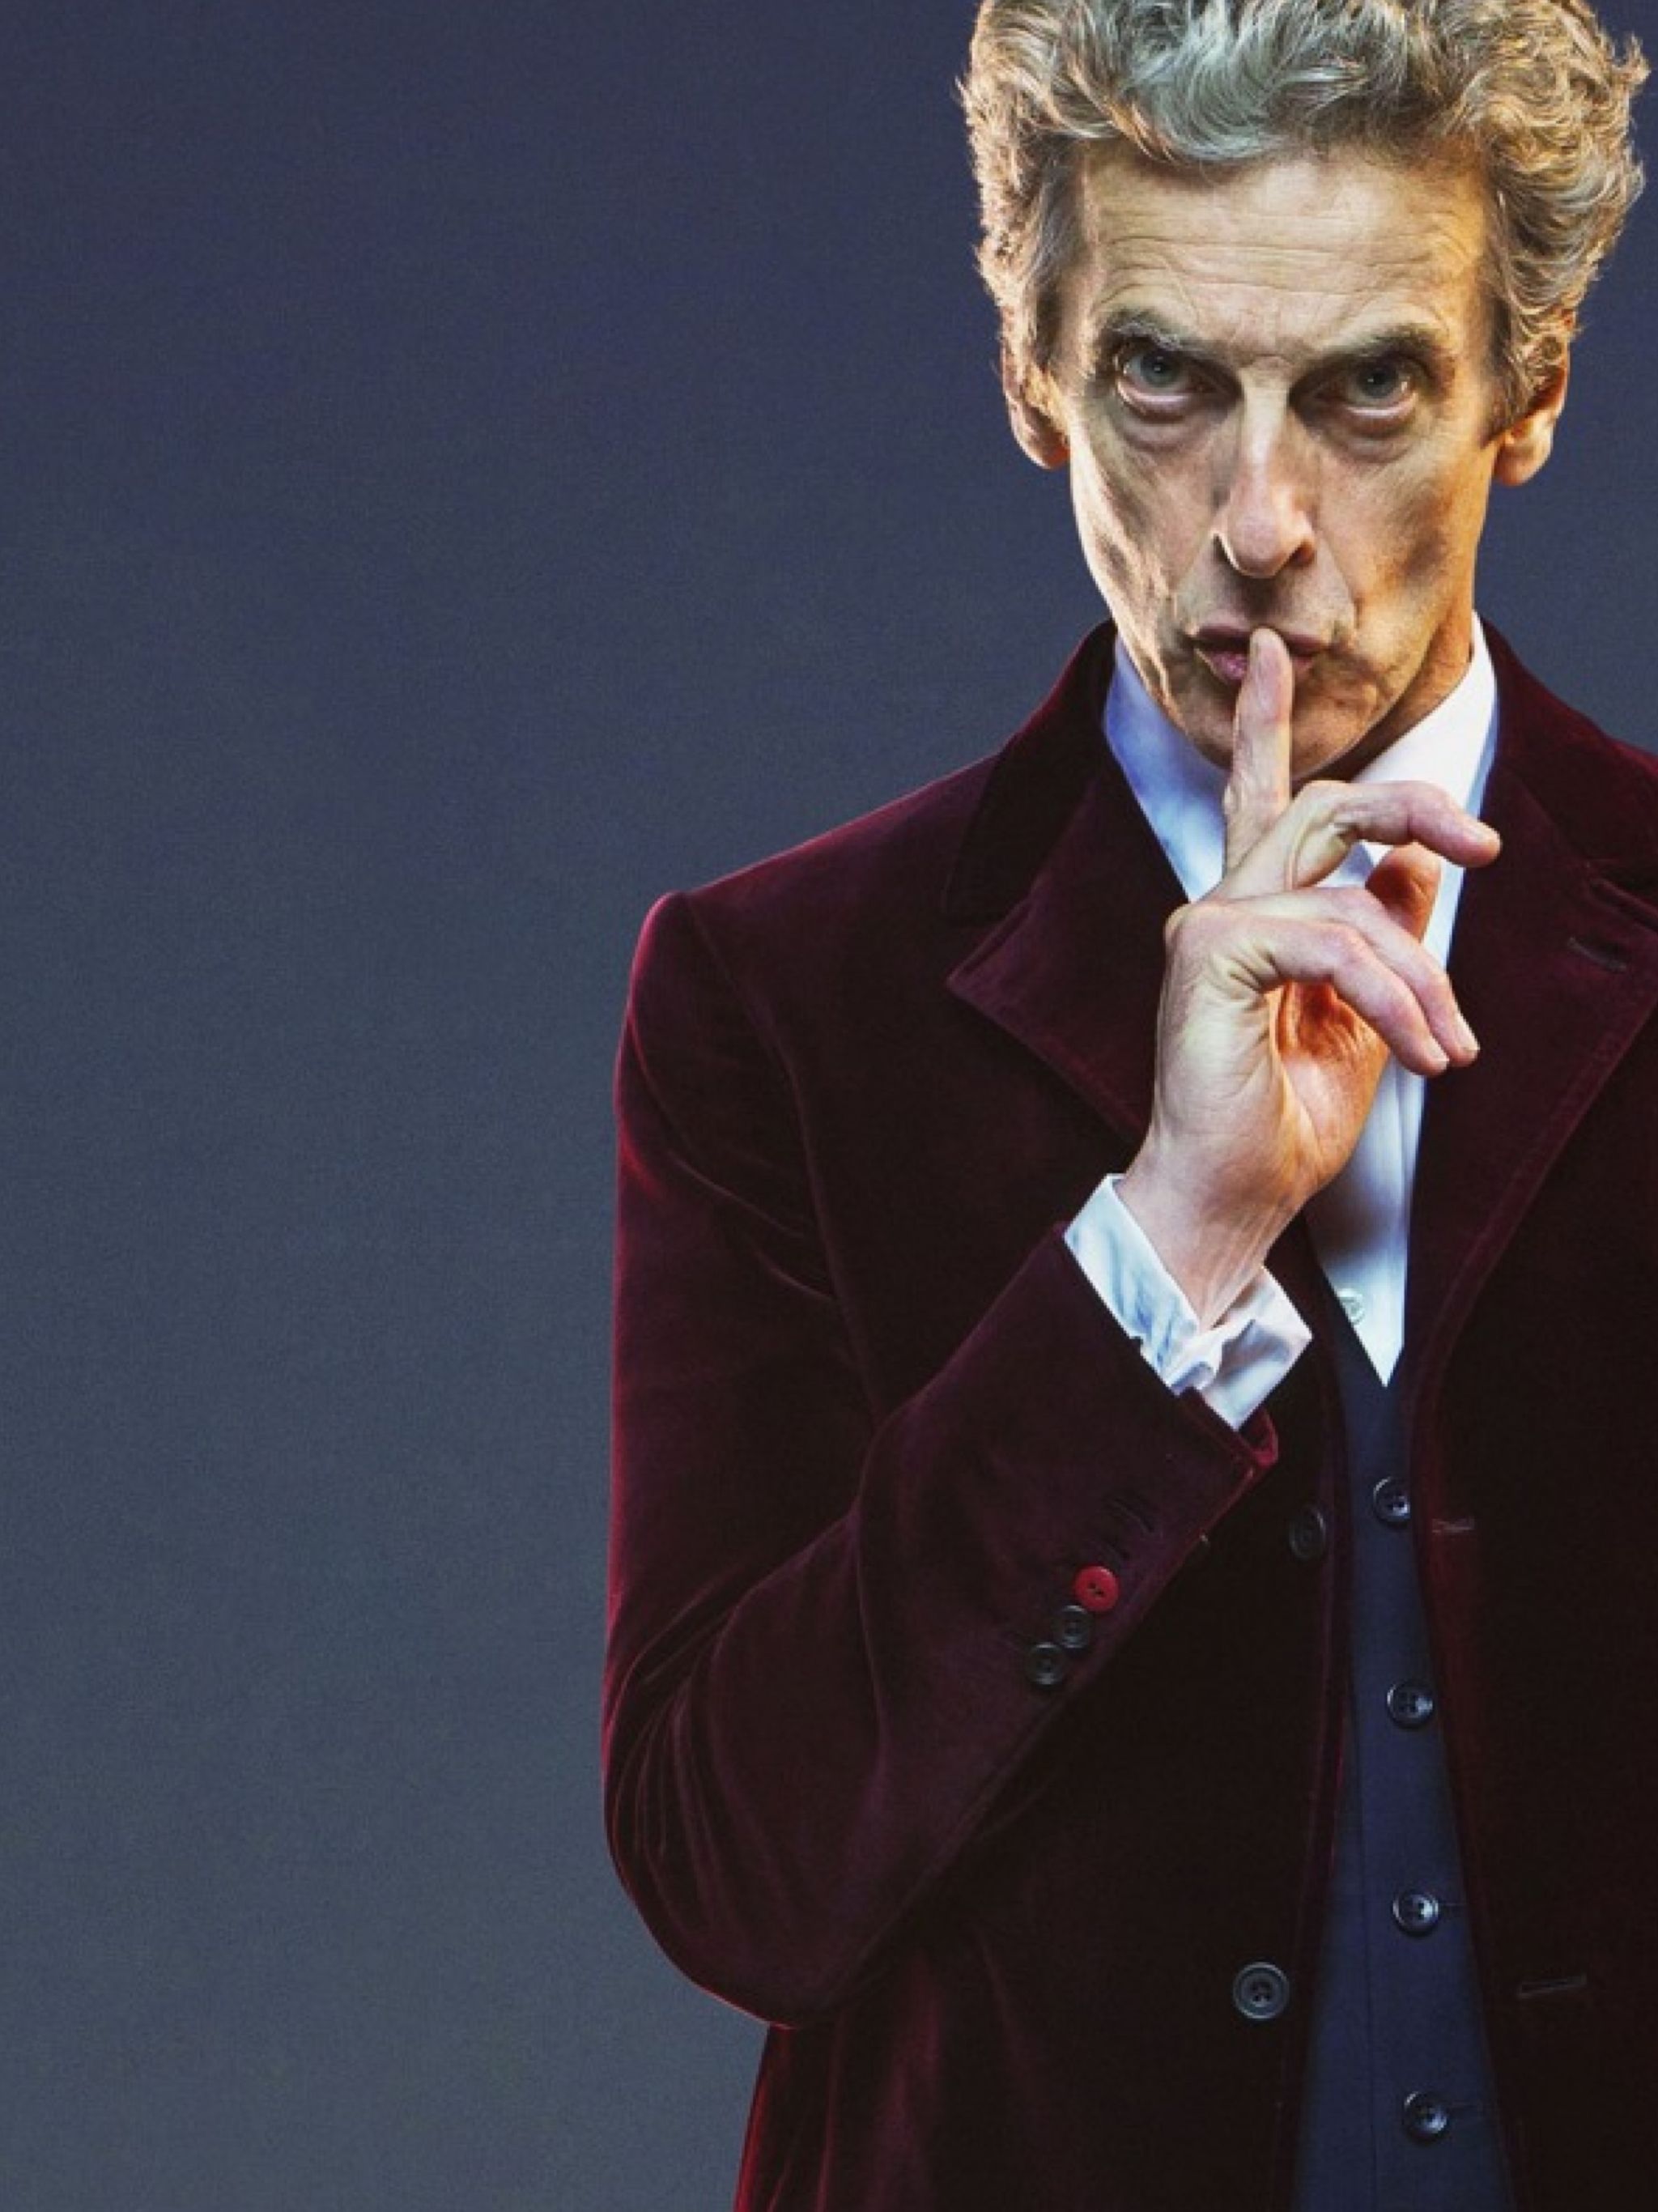 Free download 2160x3840 doctor who twelfth doctor peter capaldi Sony Xperia X [2160x3840] for your Desktop, Mobile & Tablet. Explore Peter Capaldi Wallpaper. Peter Capaldi Wallpaper, Doctor Who Wallpaper